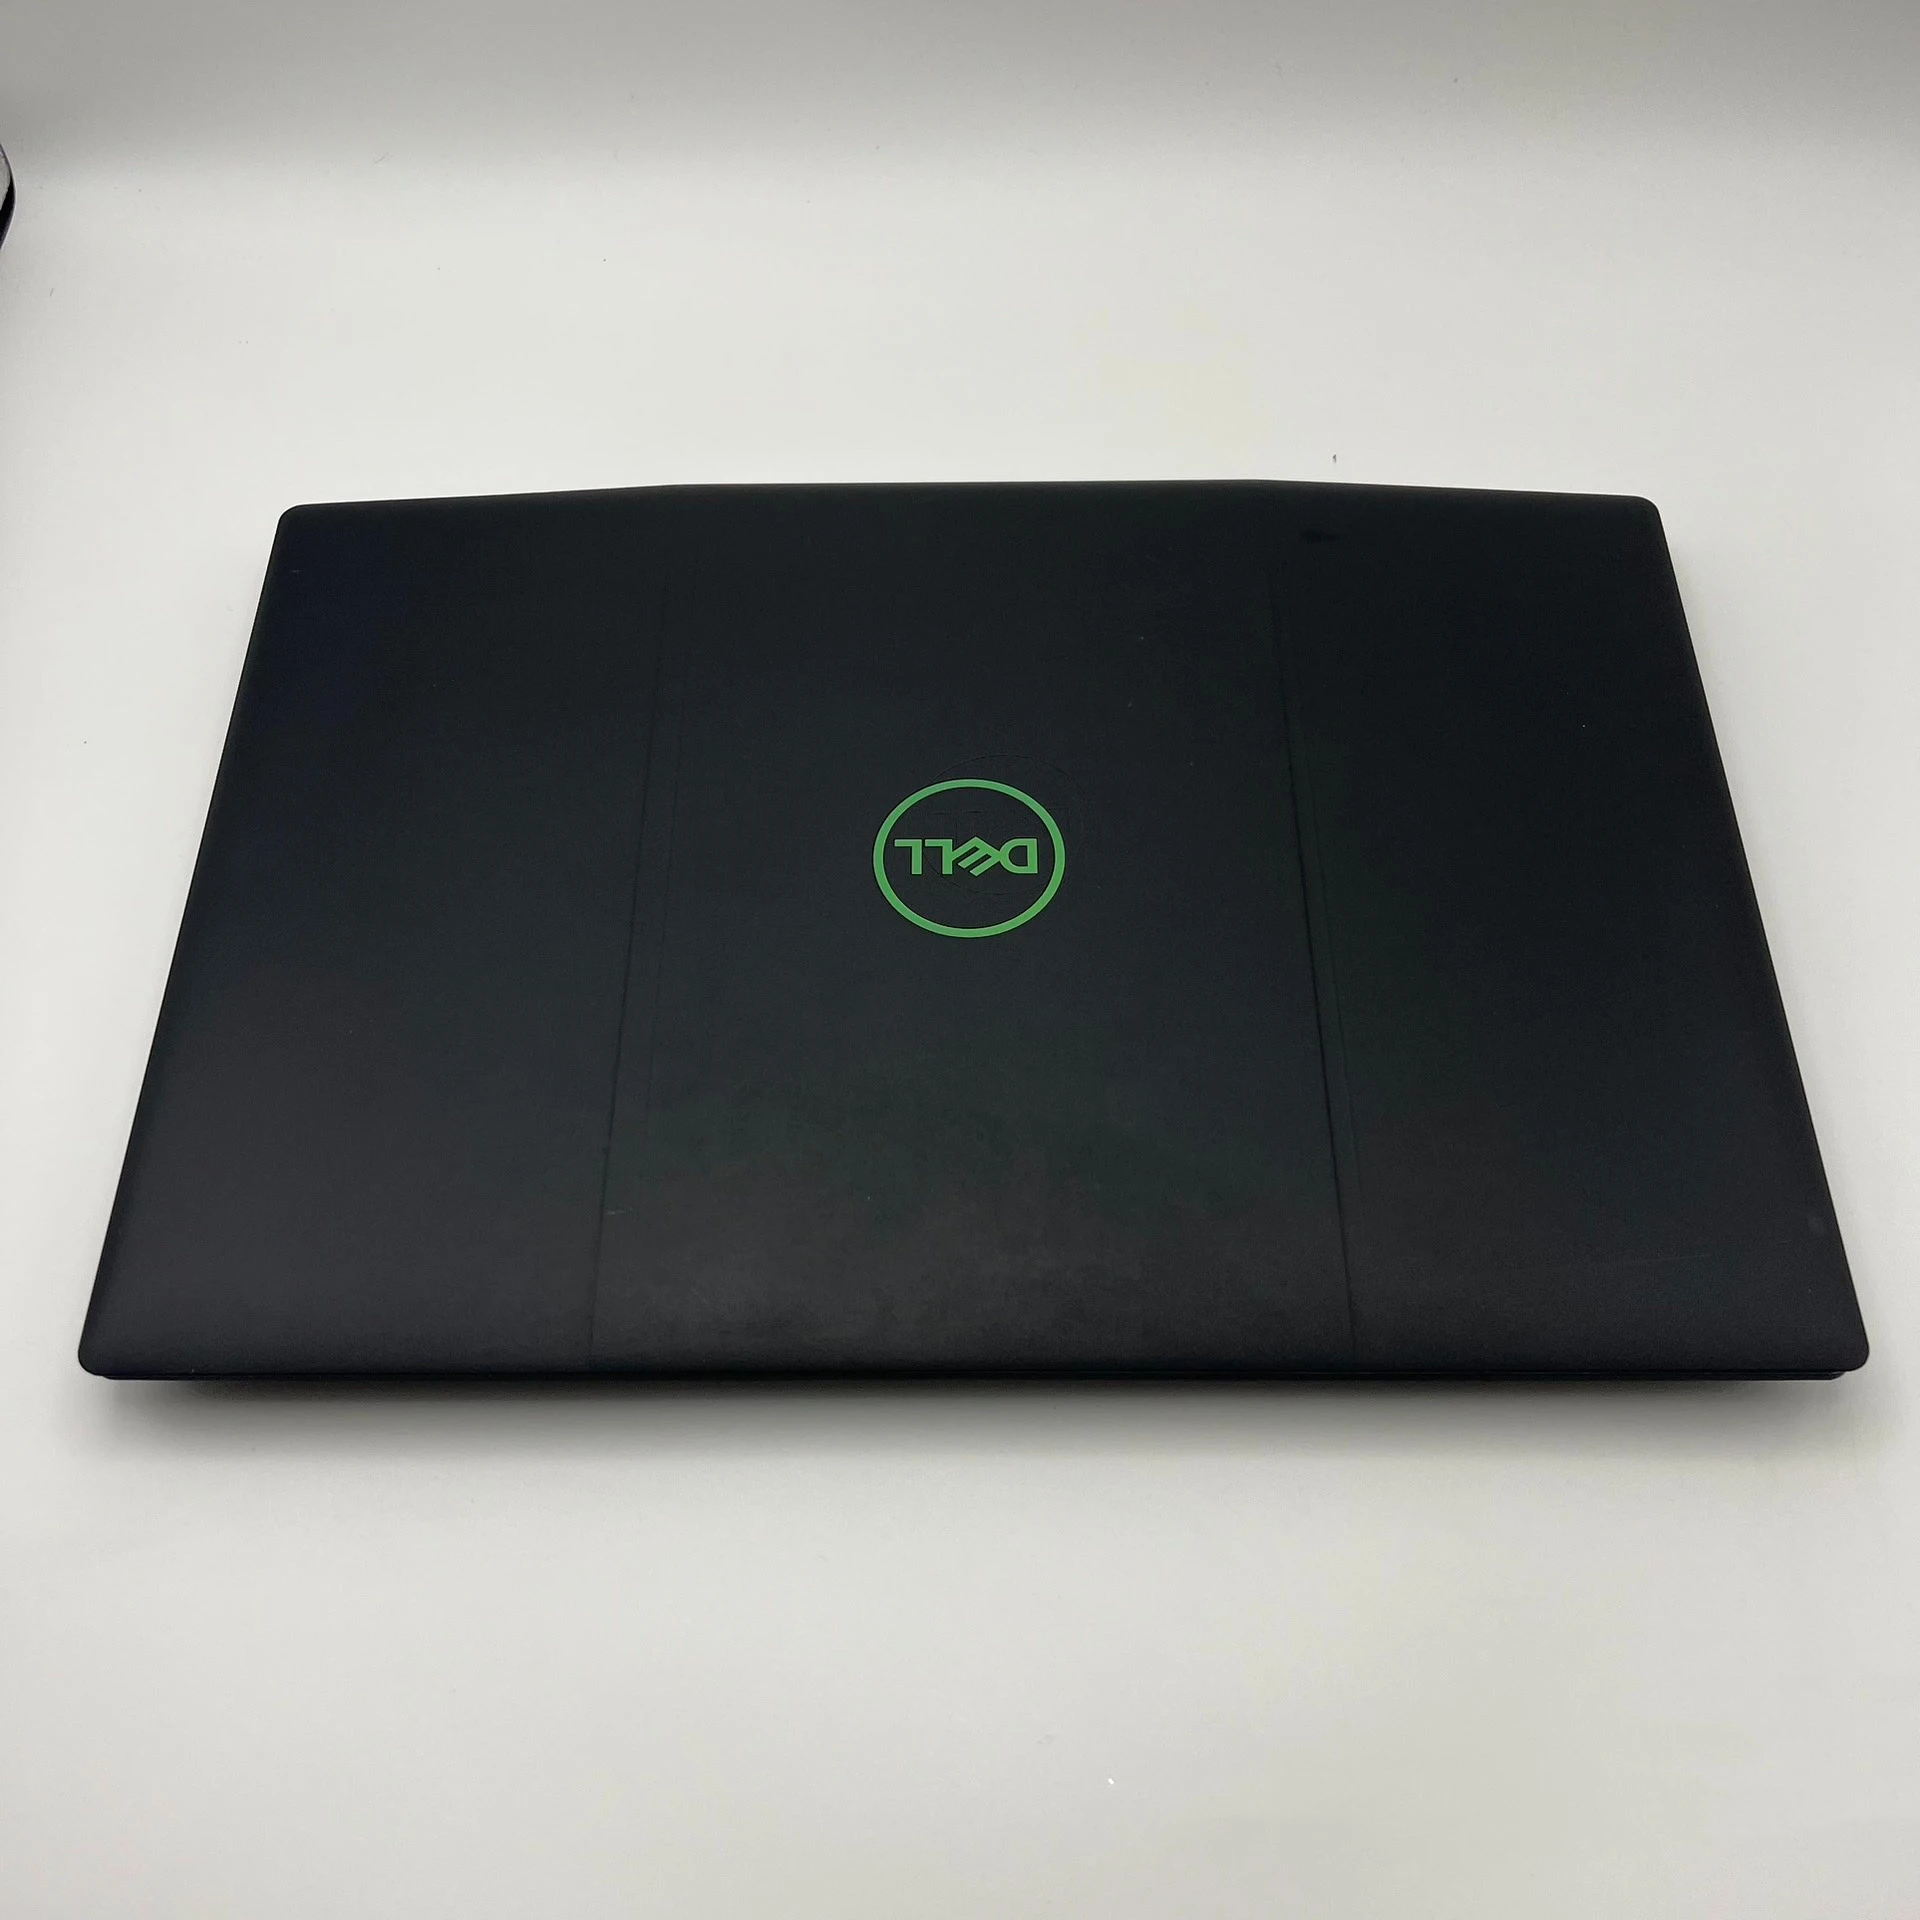 

Wholesale Bulk Purchase Consumer Electronics For dell G3-3500 i7-10750H 16GB 512 SSD RTX 2060 (6G) Gaming Laptop